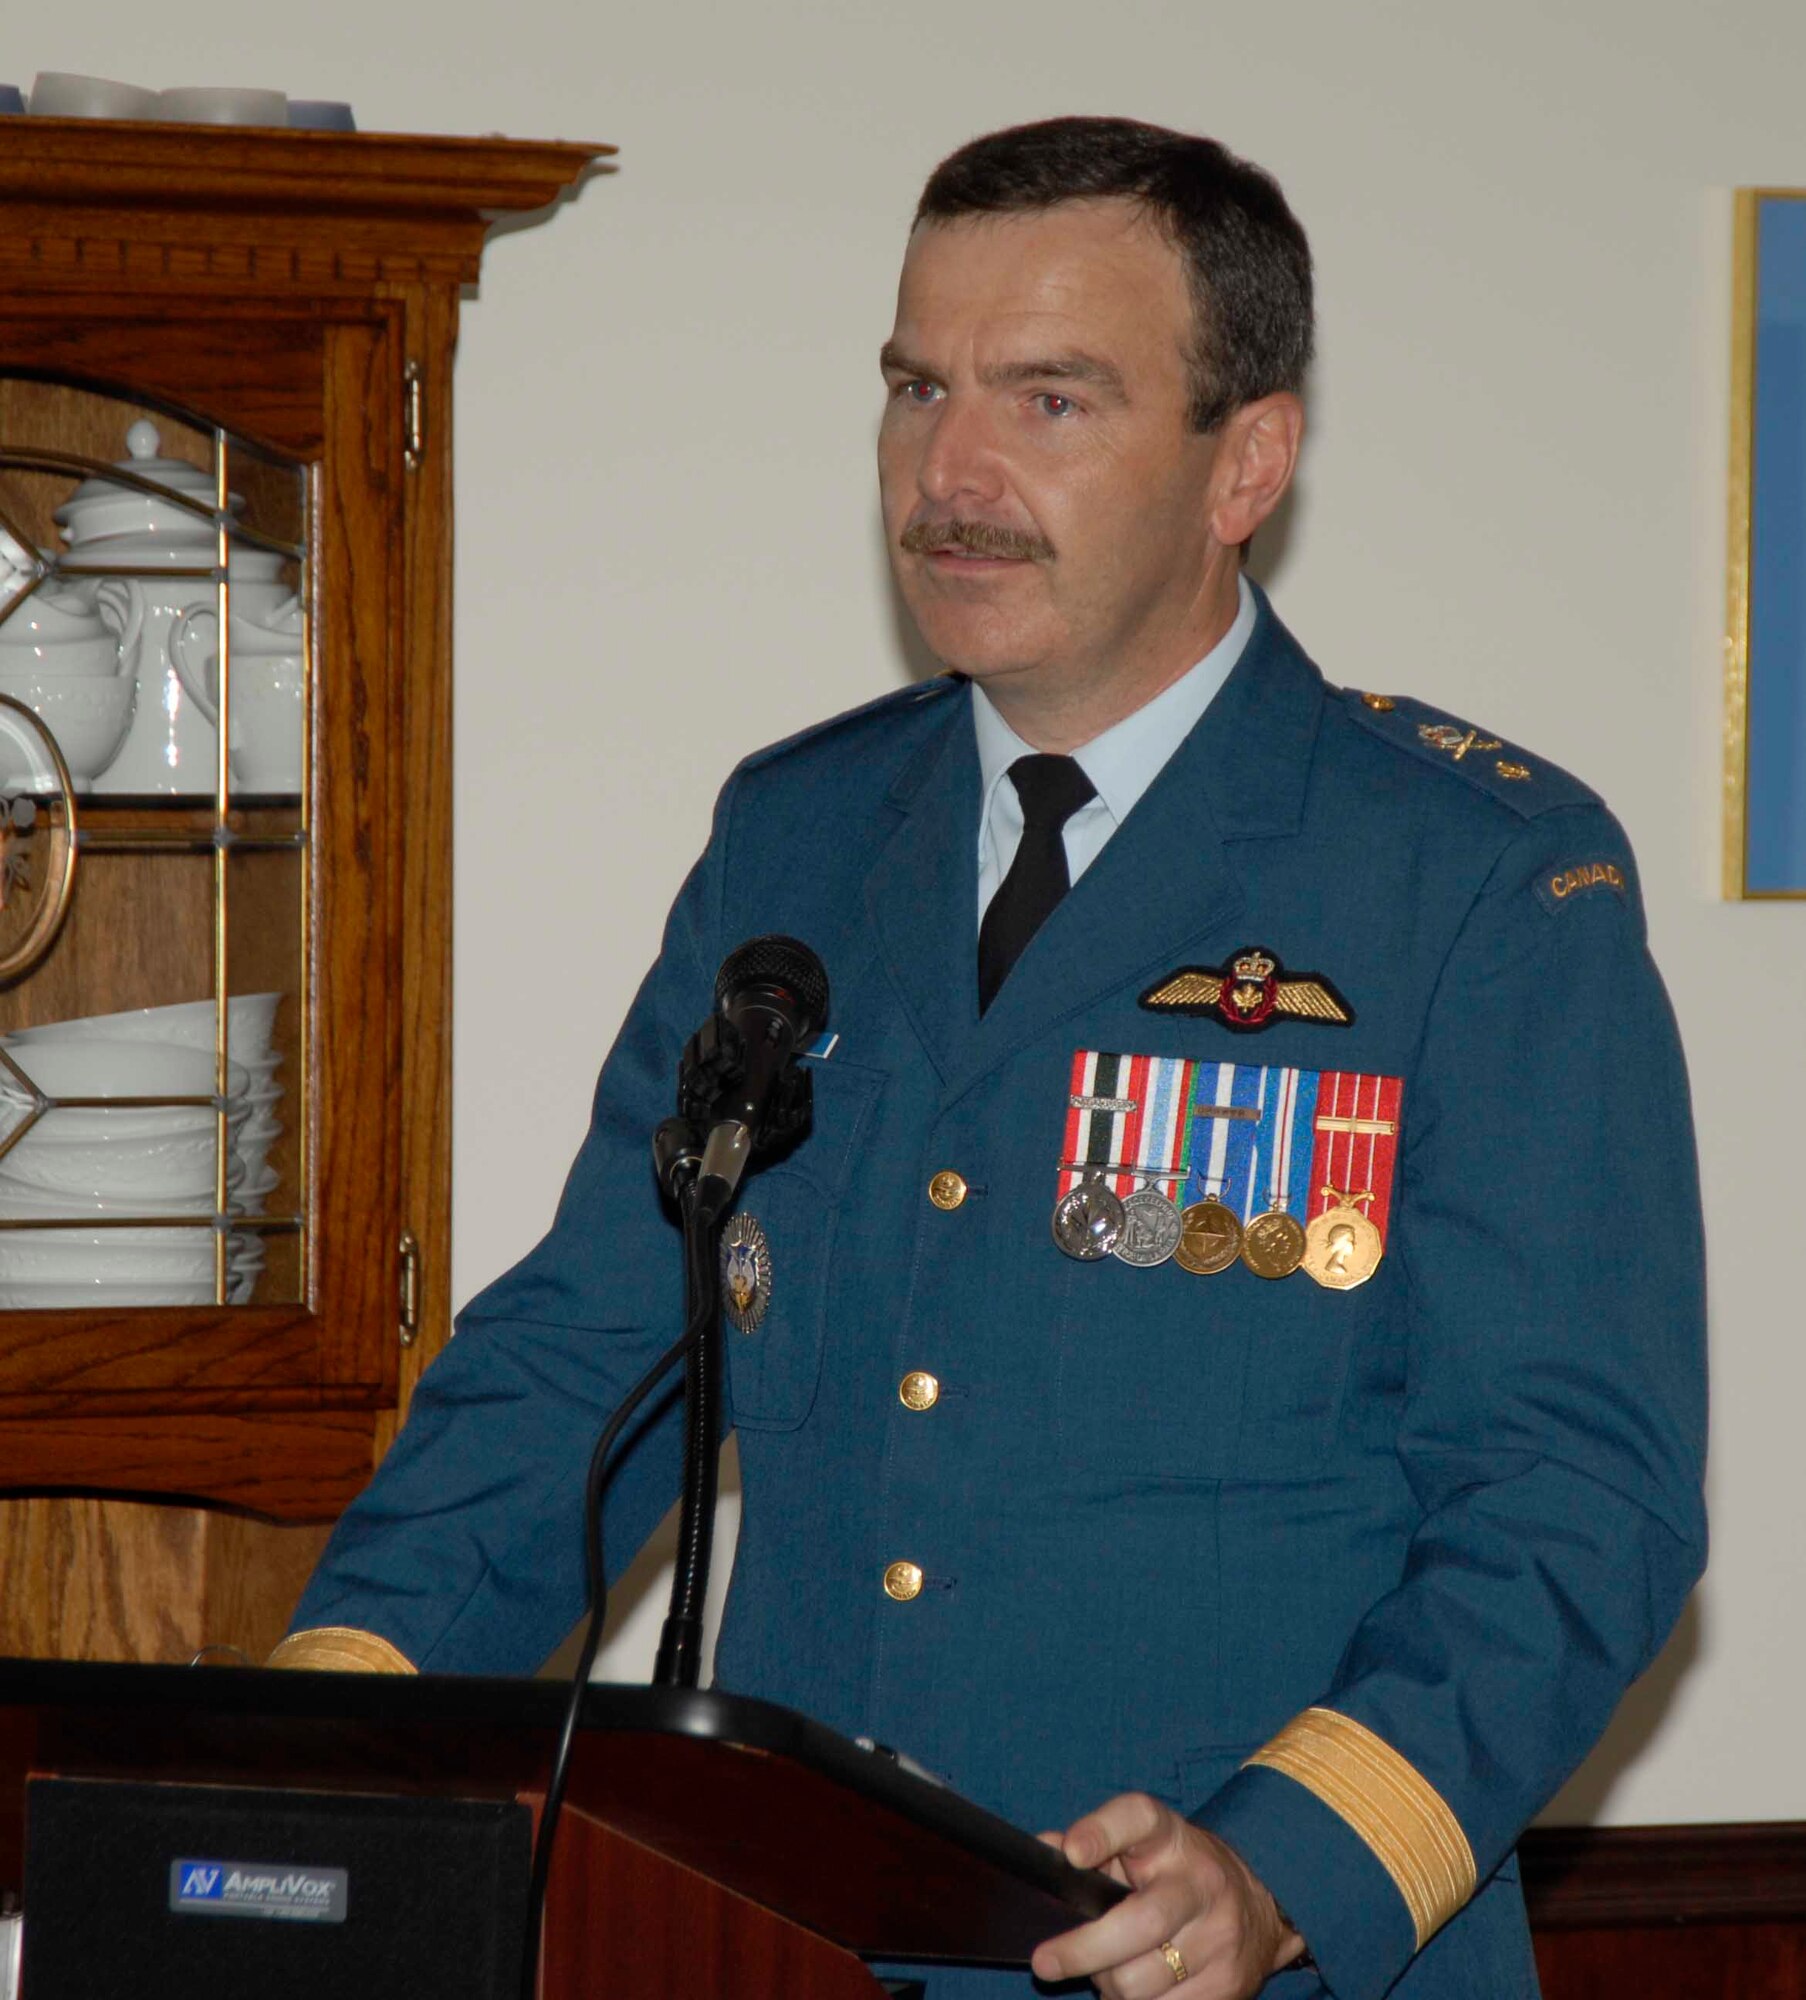 Brig. Gen. André Viens, Continental U.S. NORAD Region deputy commander, delivers a speech to members of CONR-1st Air Force (Air Forces Northern).  After serving three years as CONR’s deputy, General Viens has been assigned as the Director General of Military Careers for Canadian Forces at Canada’s National Defence Headquarters in Ottawa.  (U.S. Air Force photo)